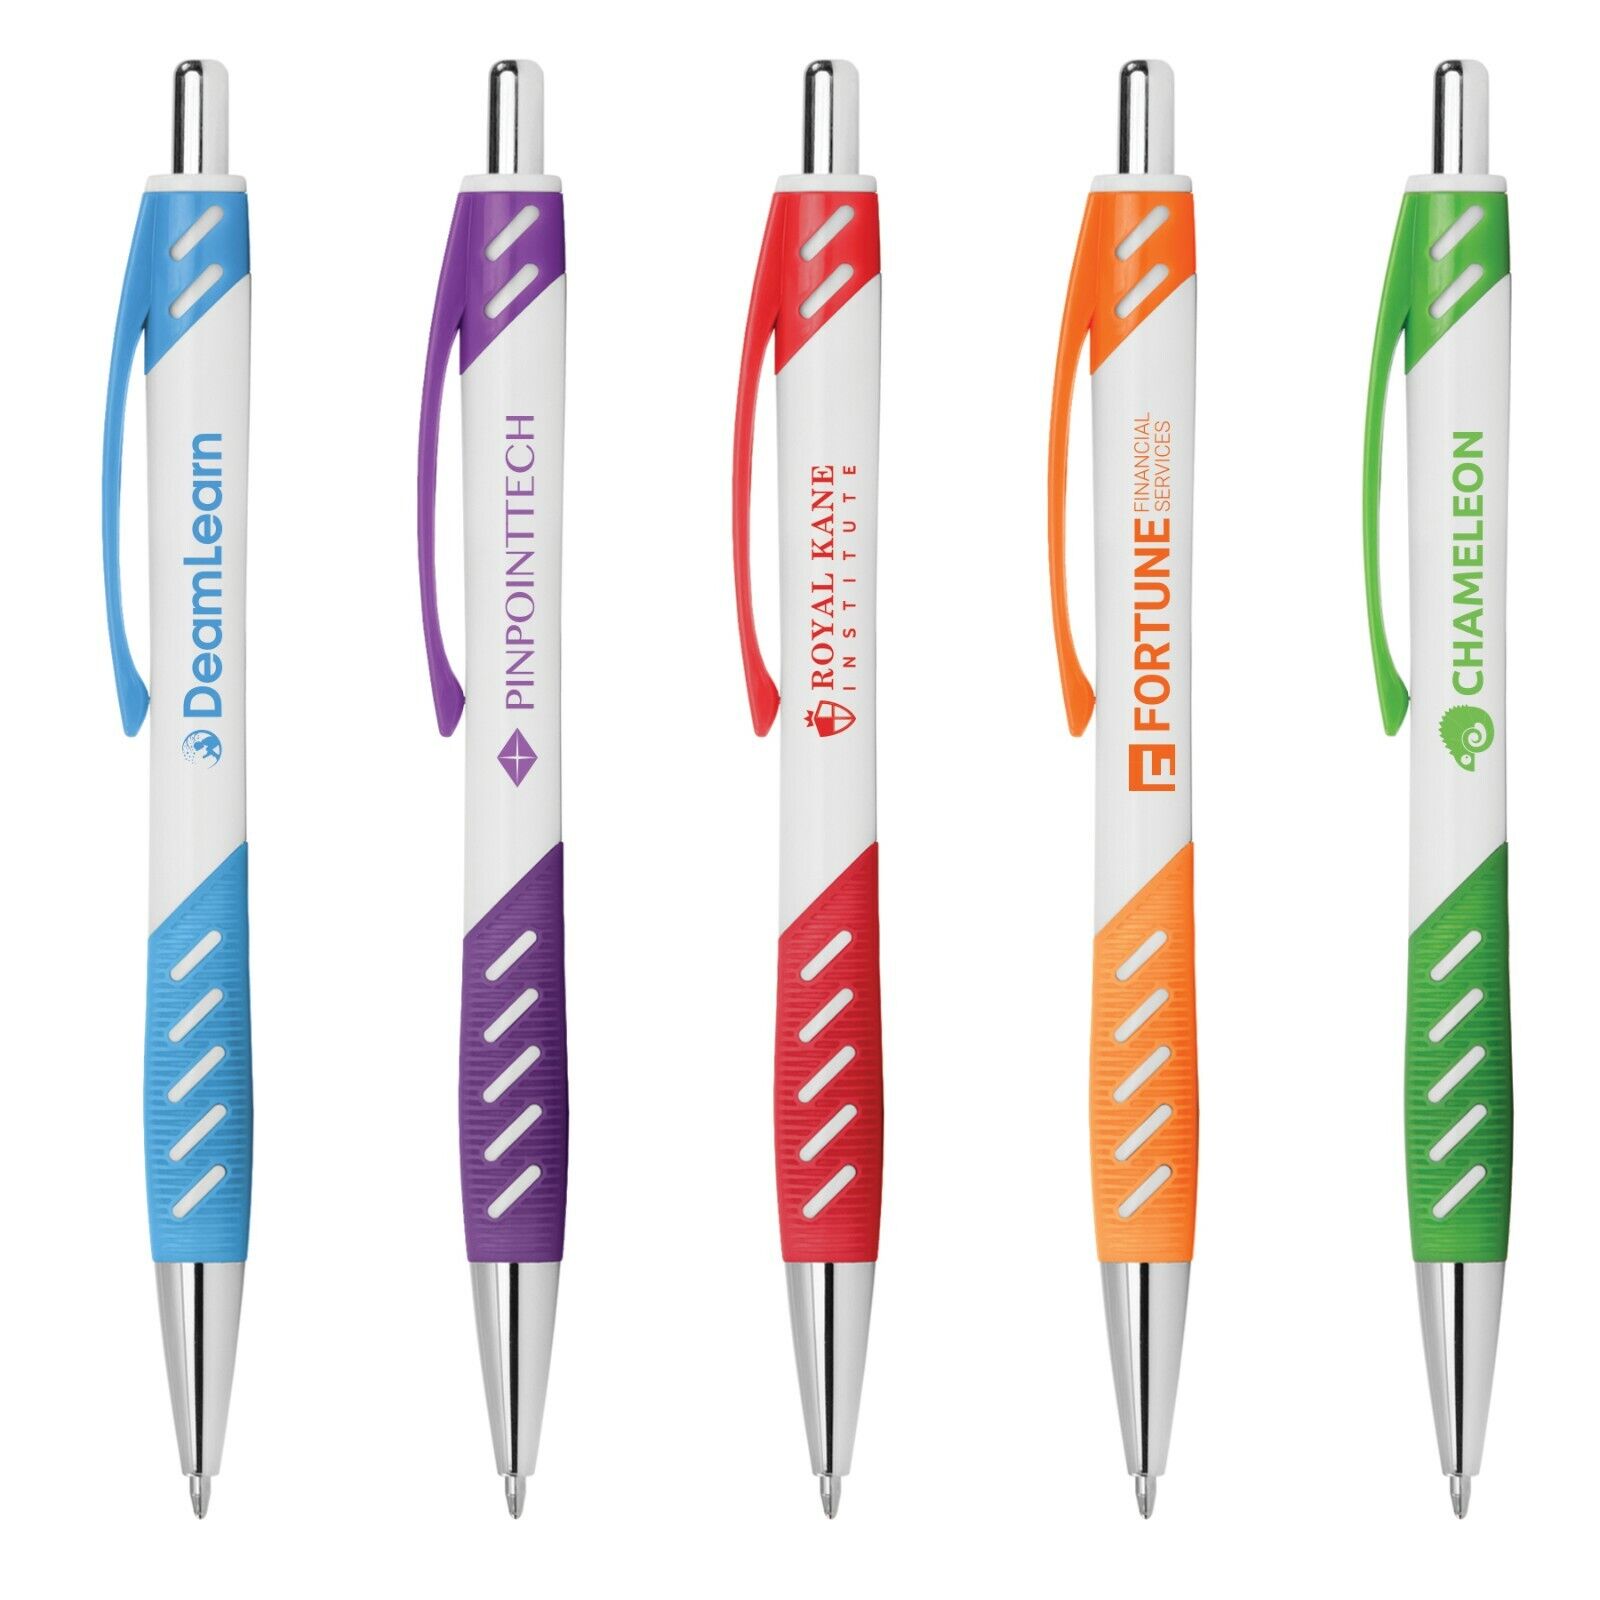 Promote your Business with Personalized Pens with your Logo + Info  - 250 QTY